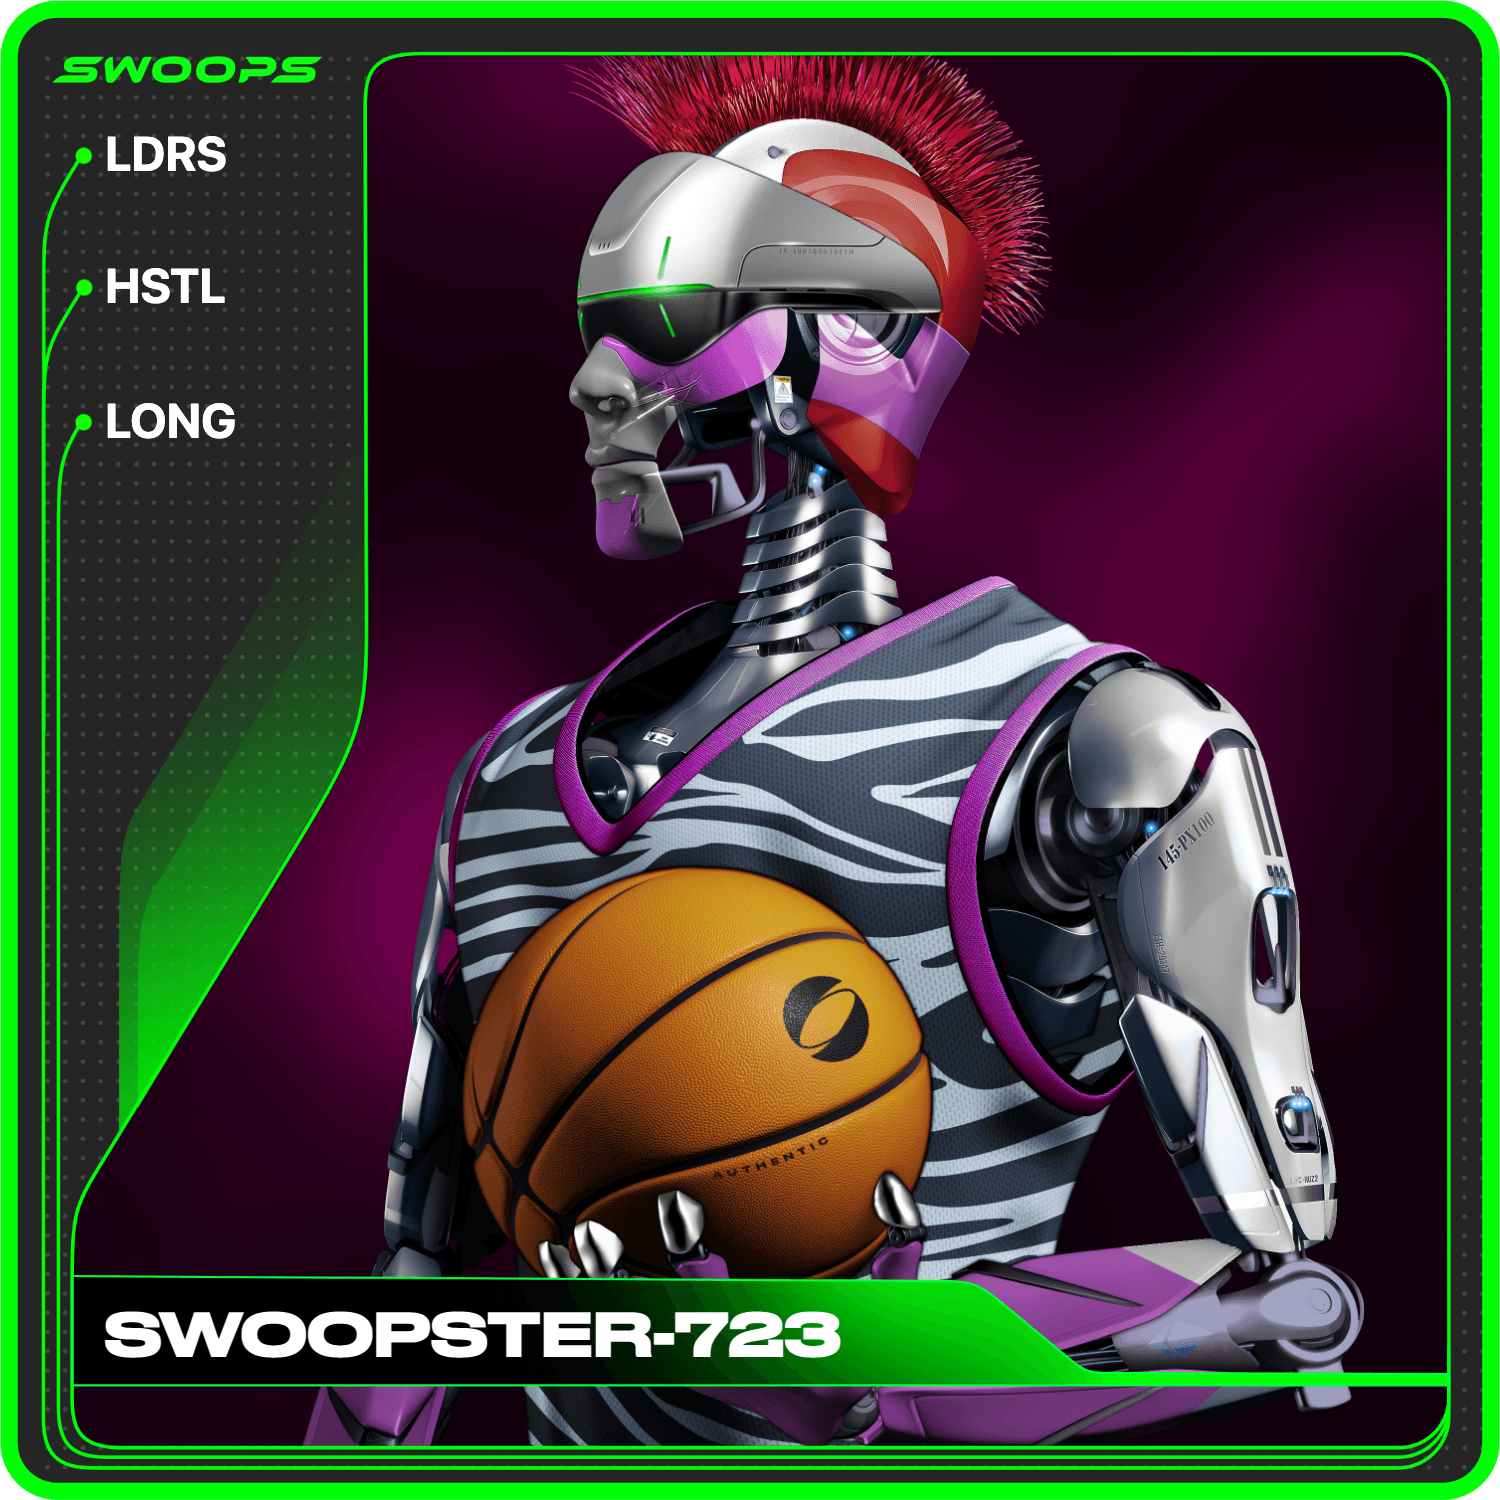 SWOOPSTER-723